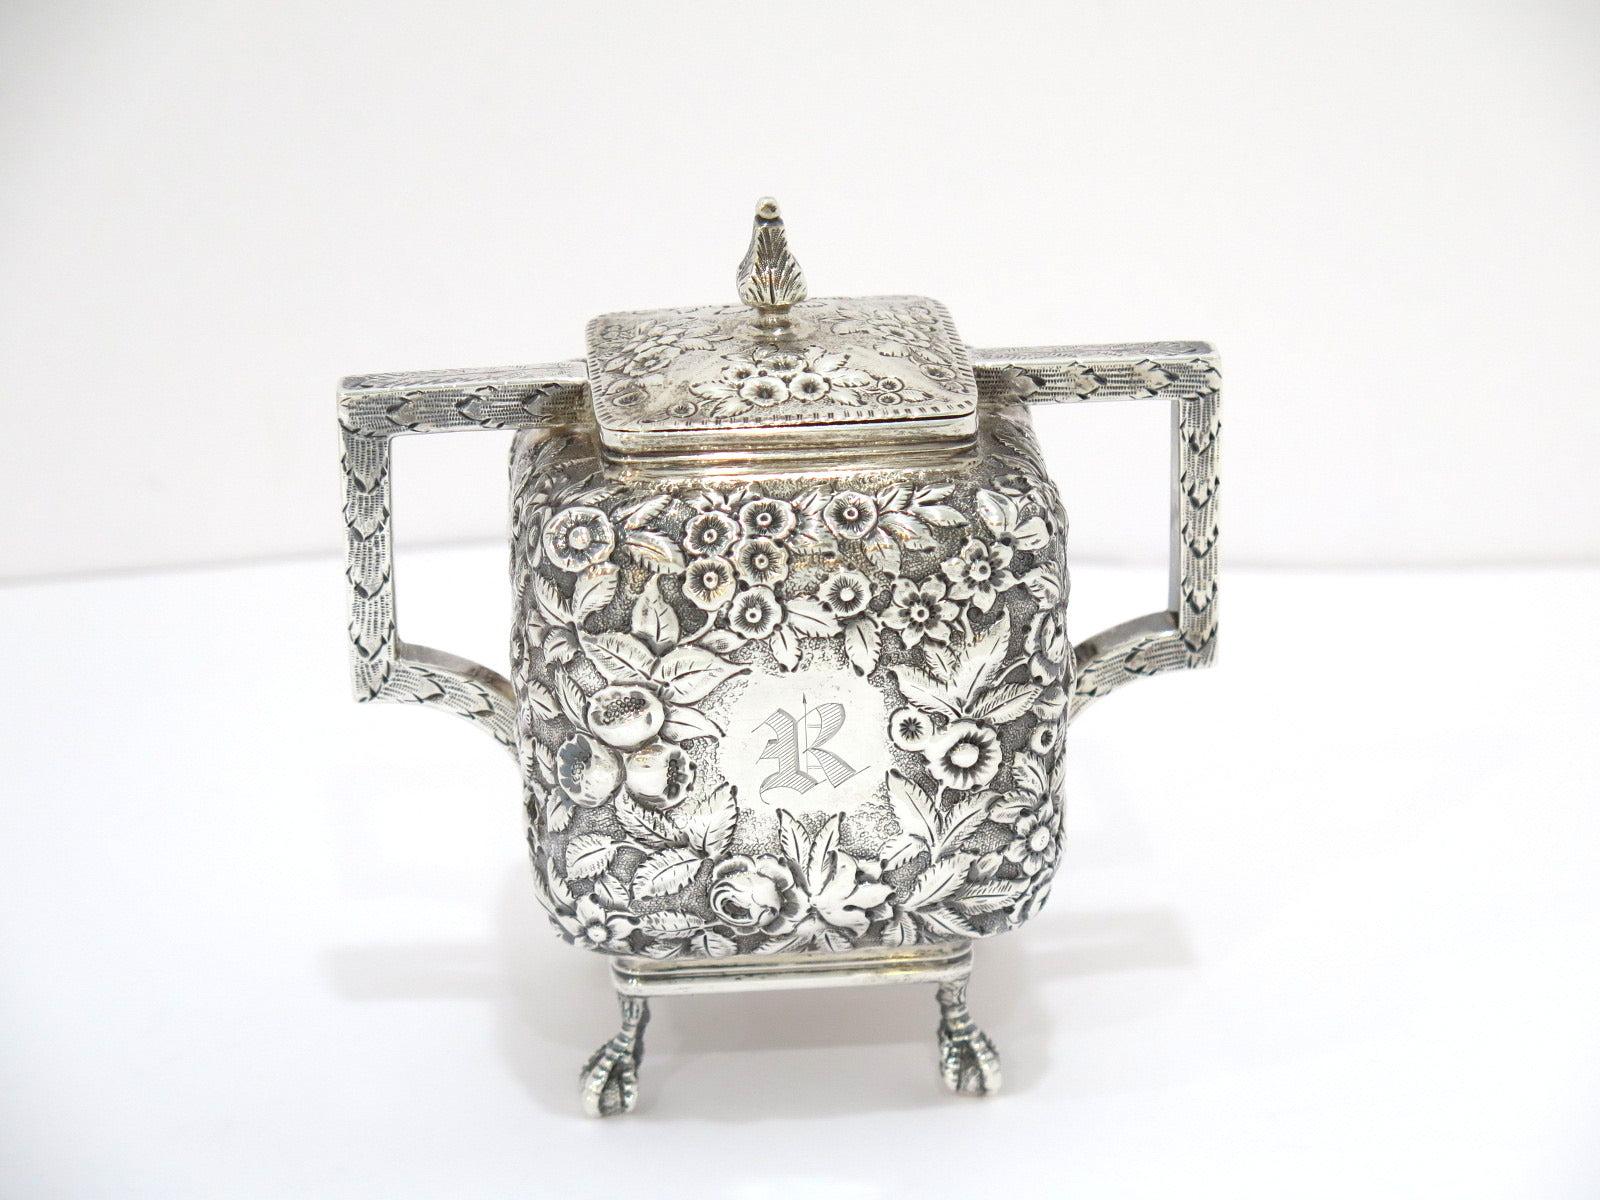 19th Century Coin Silver Antique American Floral Repousse Mini Sugar Bowl, Creamer & Tray Set For Sale